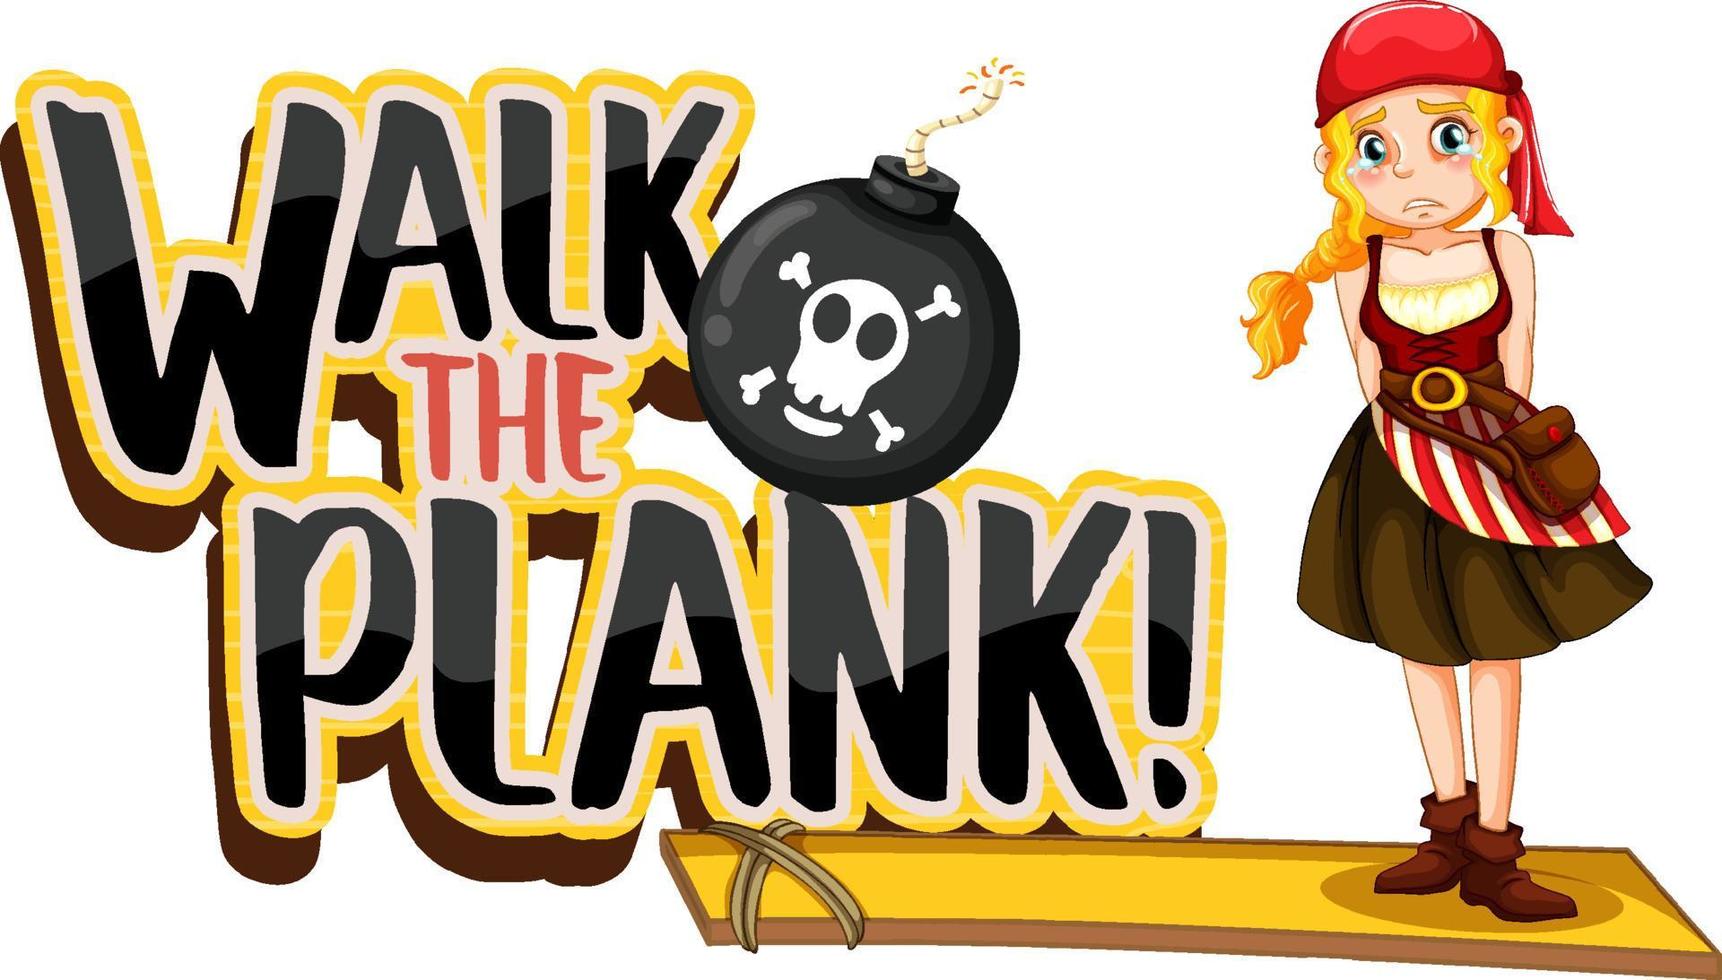 Walk the plank logo banner with a pirate girl cartoon character vector